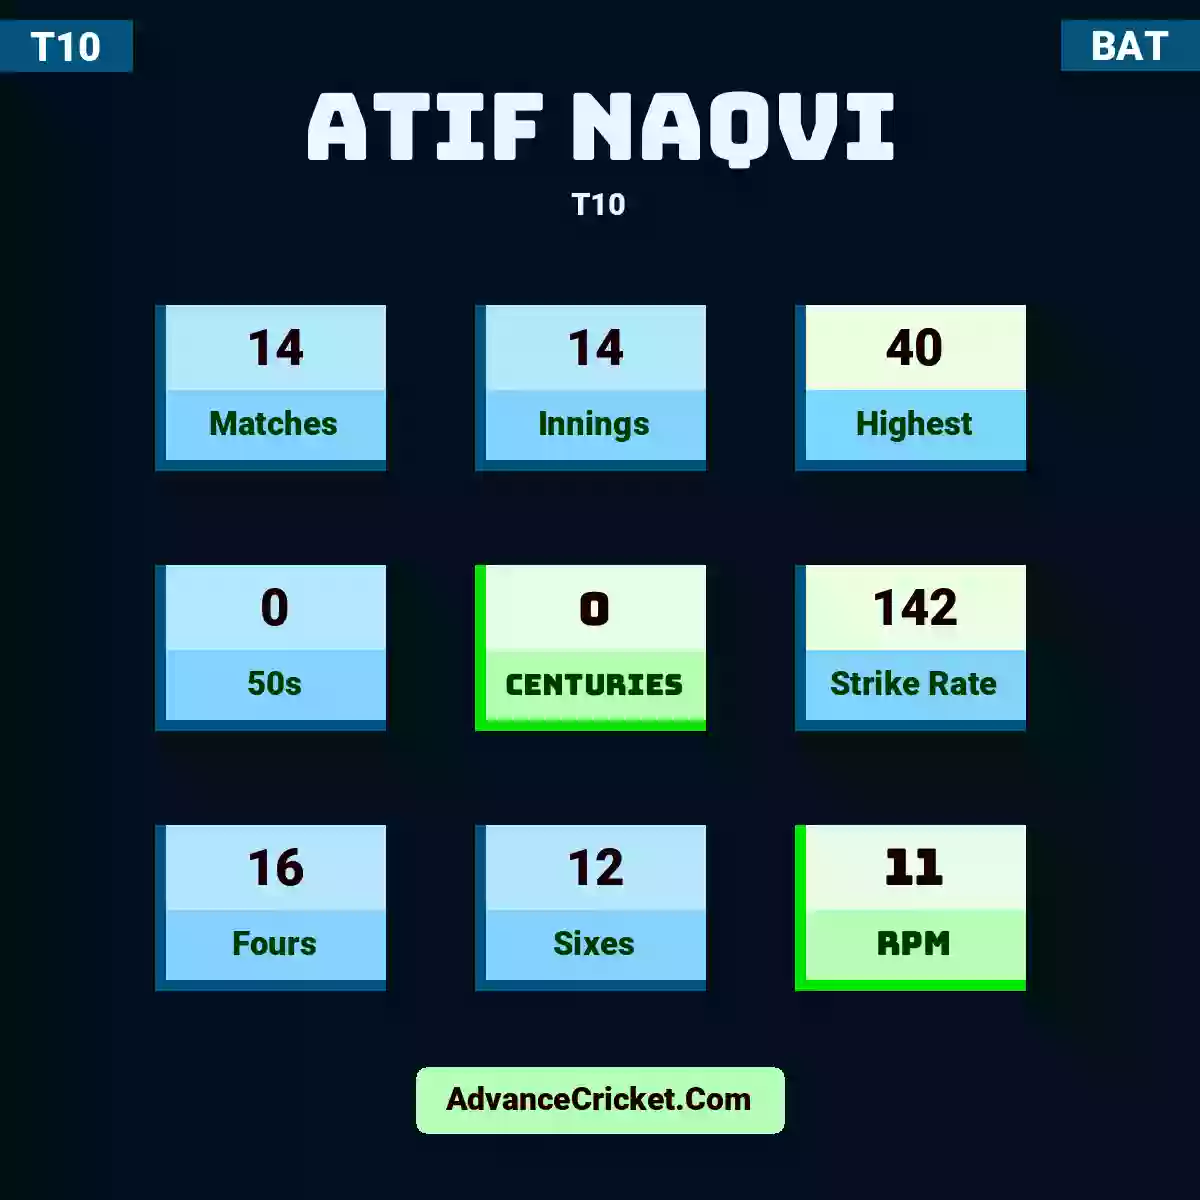 Atif Naqvi T10 , Atif Naqvi played 14 matches, scored 40 runs as highest, 0 half-centuries, and 0 centuries, with a strike rate of 142. A.Naqvi hit 16 fours and 12 sixes, with an RPM of 11.